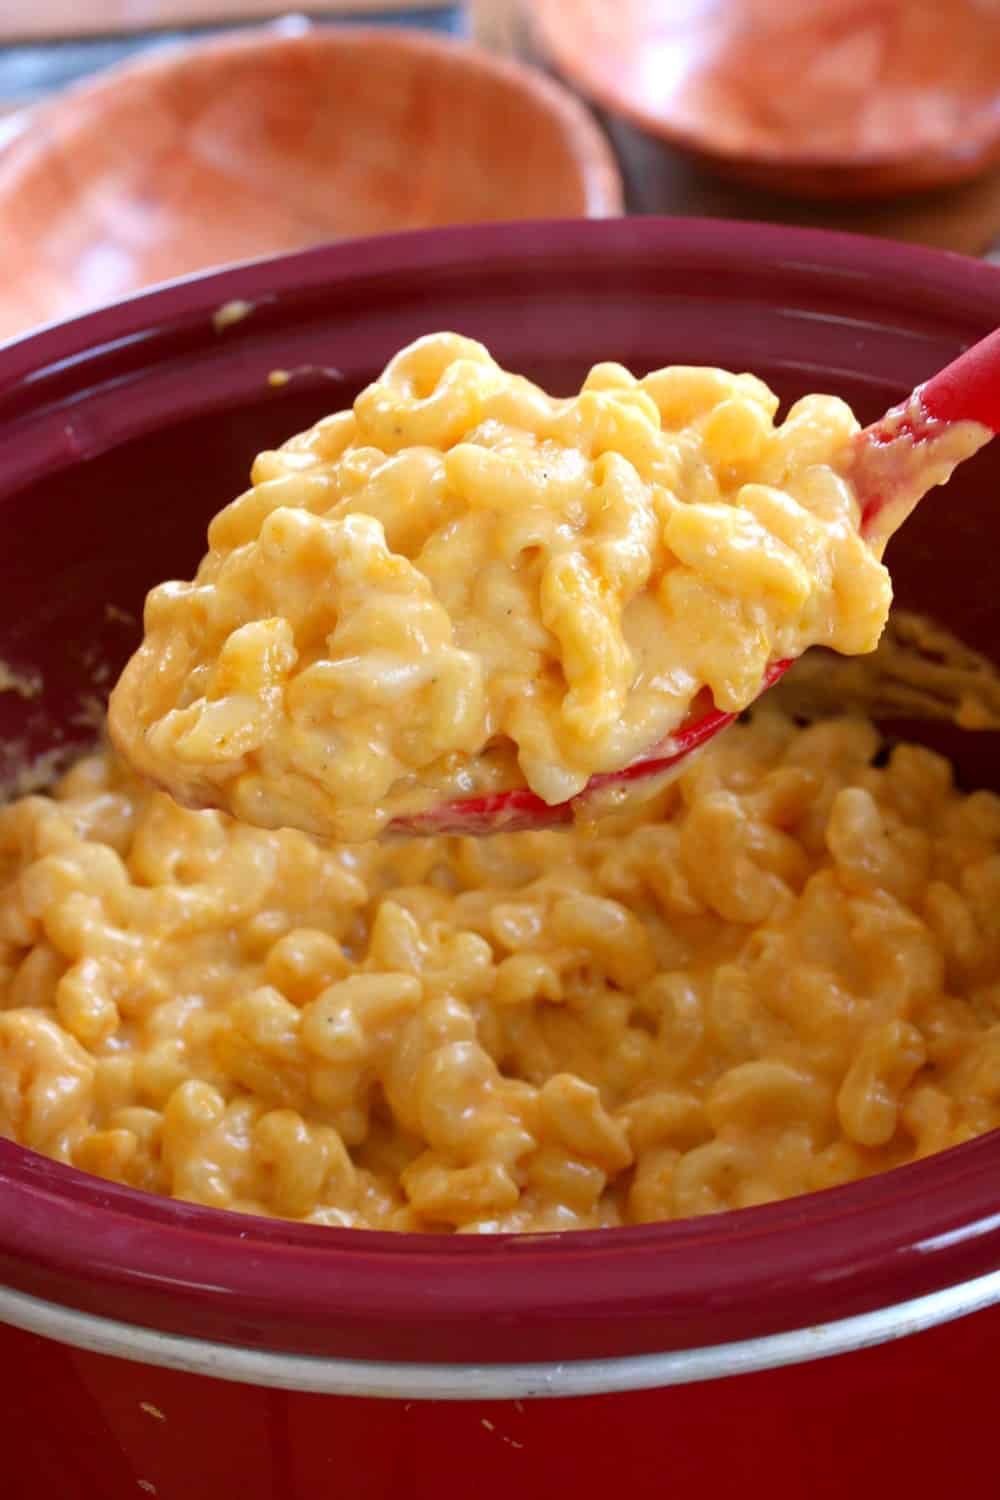 Large spoon full of macaroni and cheese scooped up from a red crock pot.